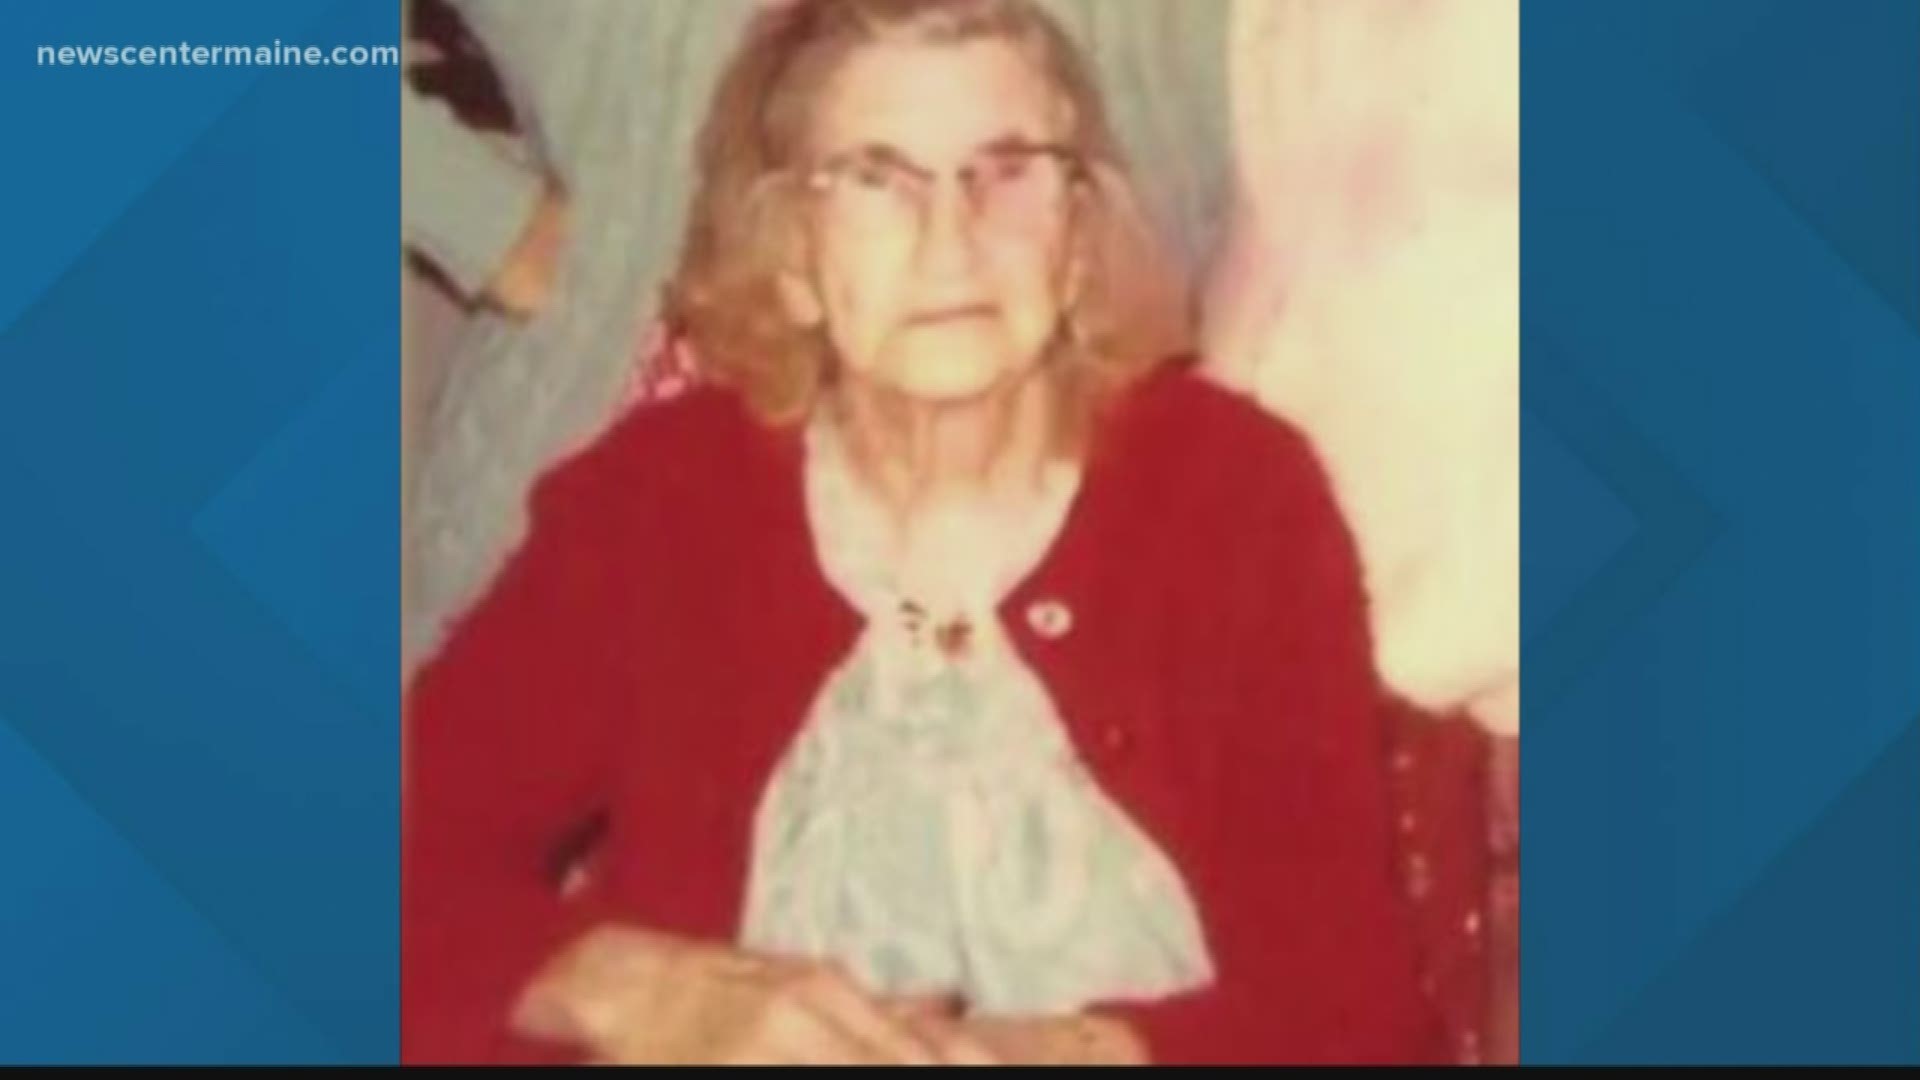 Ninety-year-old Emily Chase was found dead in her home. Her death was ruled a homicide. Forty-two years later, police are still asking for help to solve her murder.